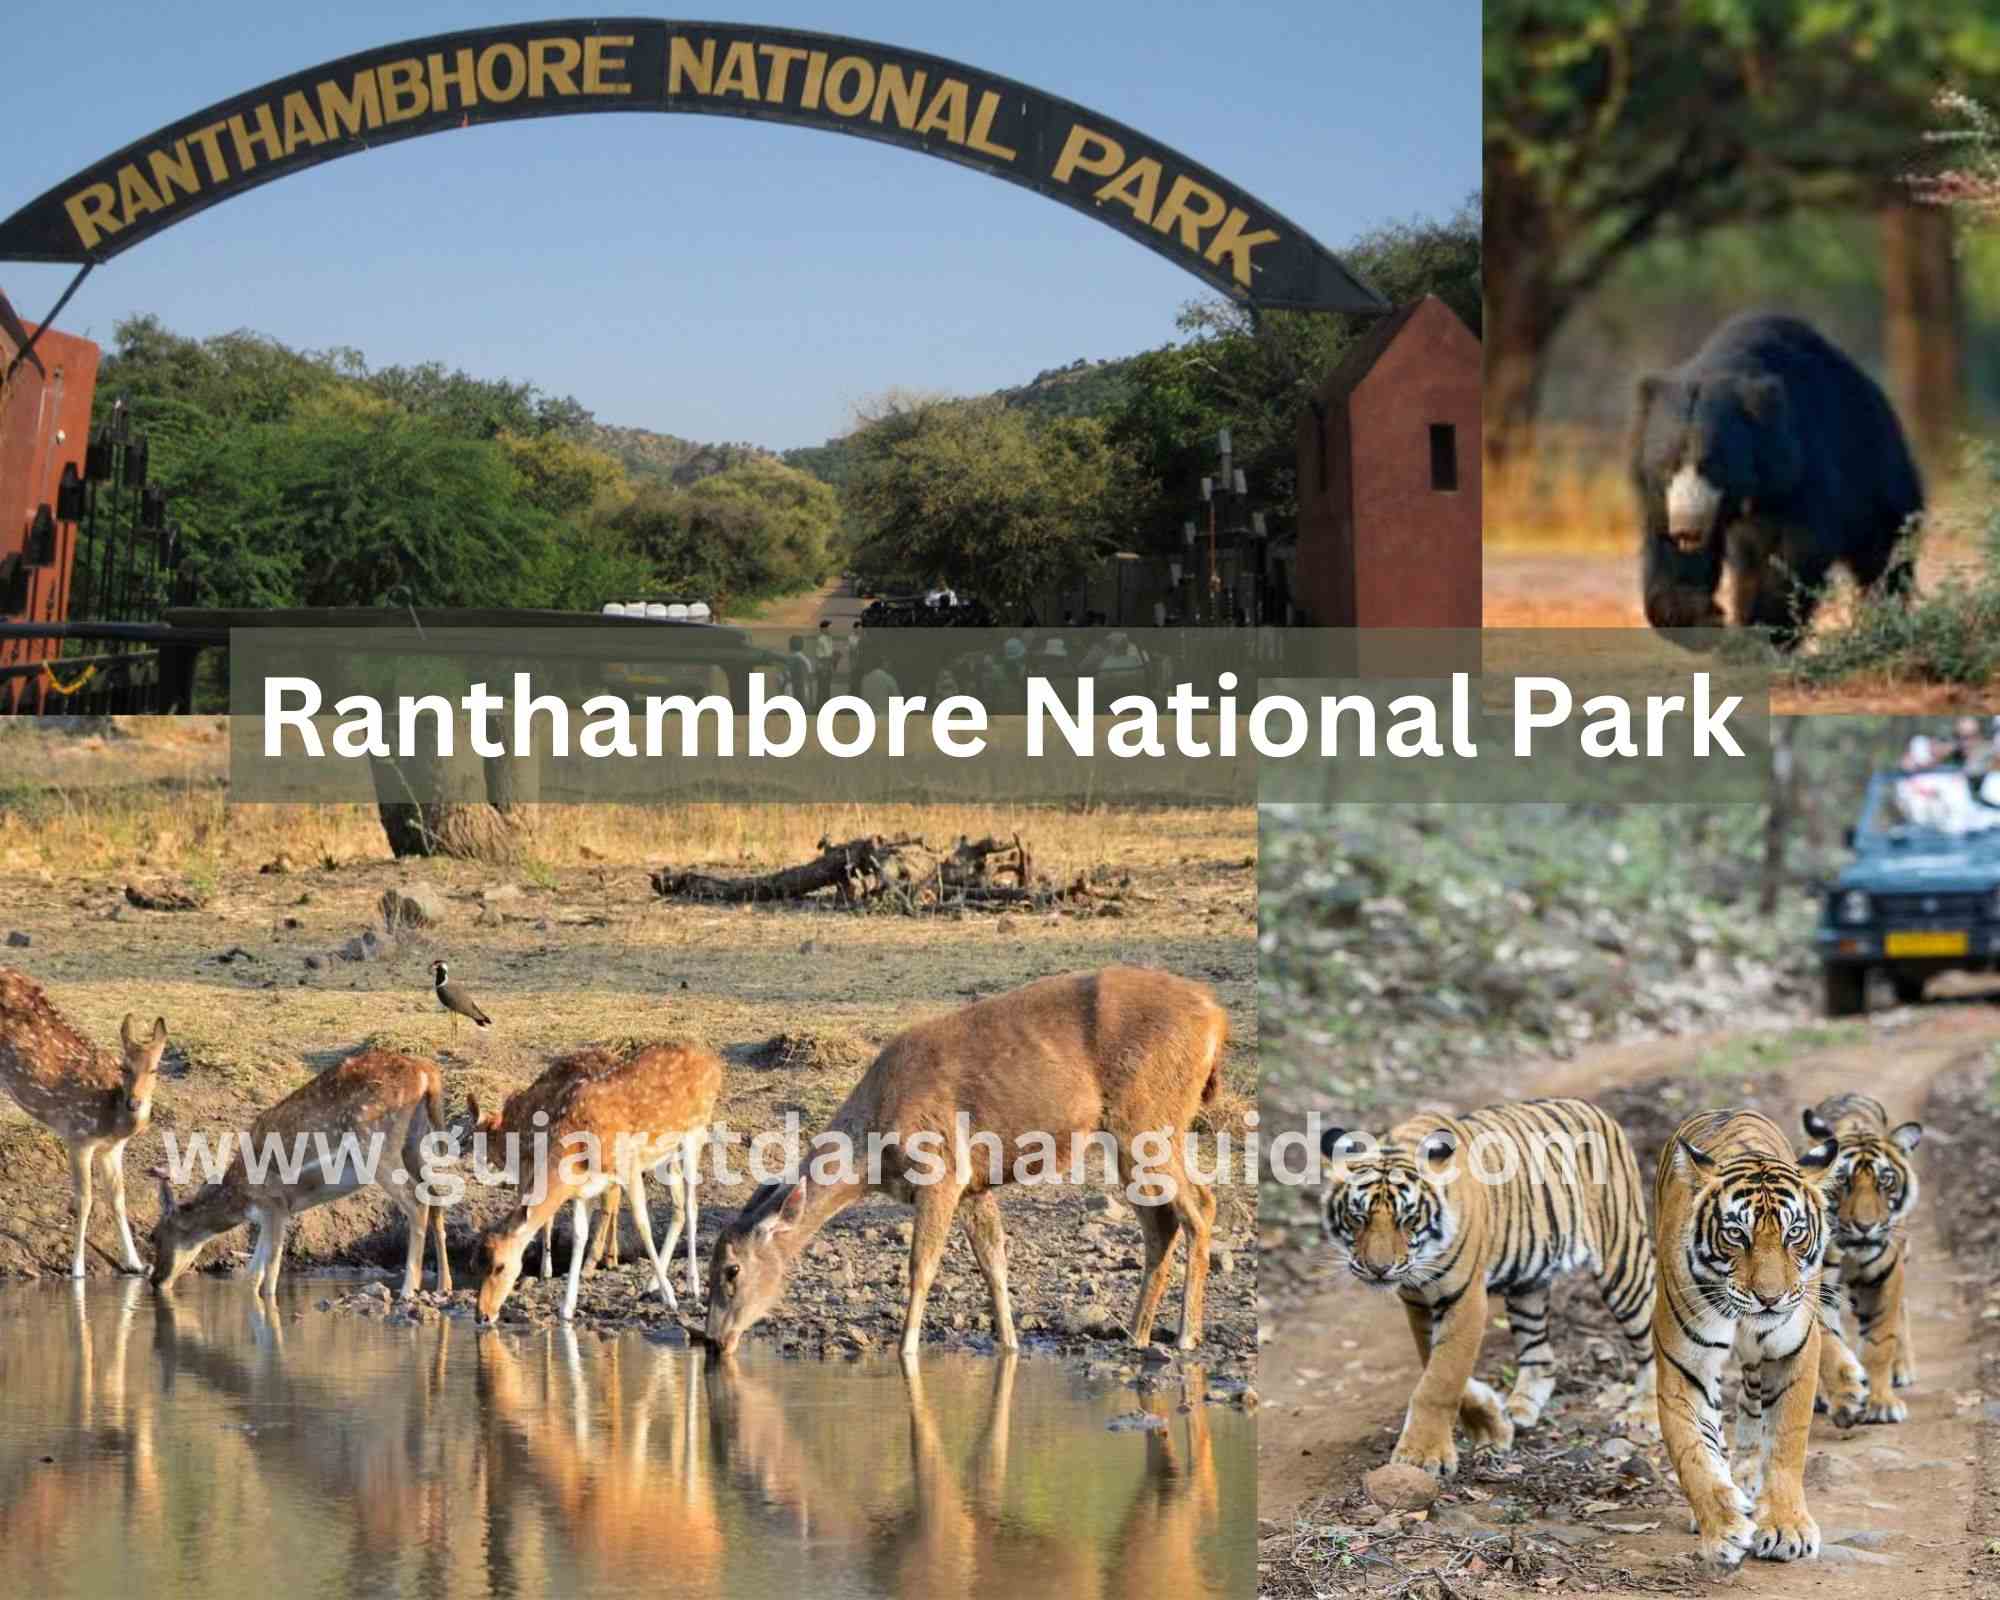 Ranthambore National Park Timings, Ticket Prices, History, Best Time To Visit Gujarat Darshan